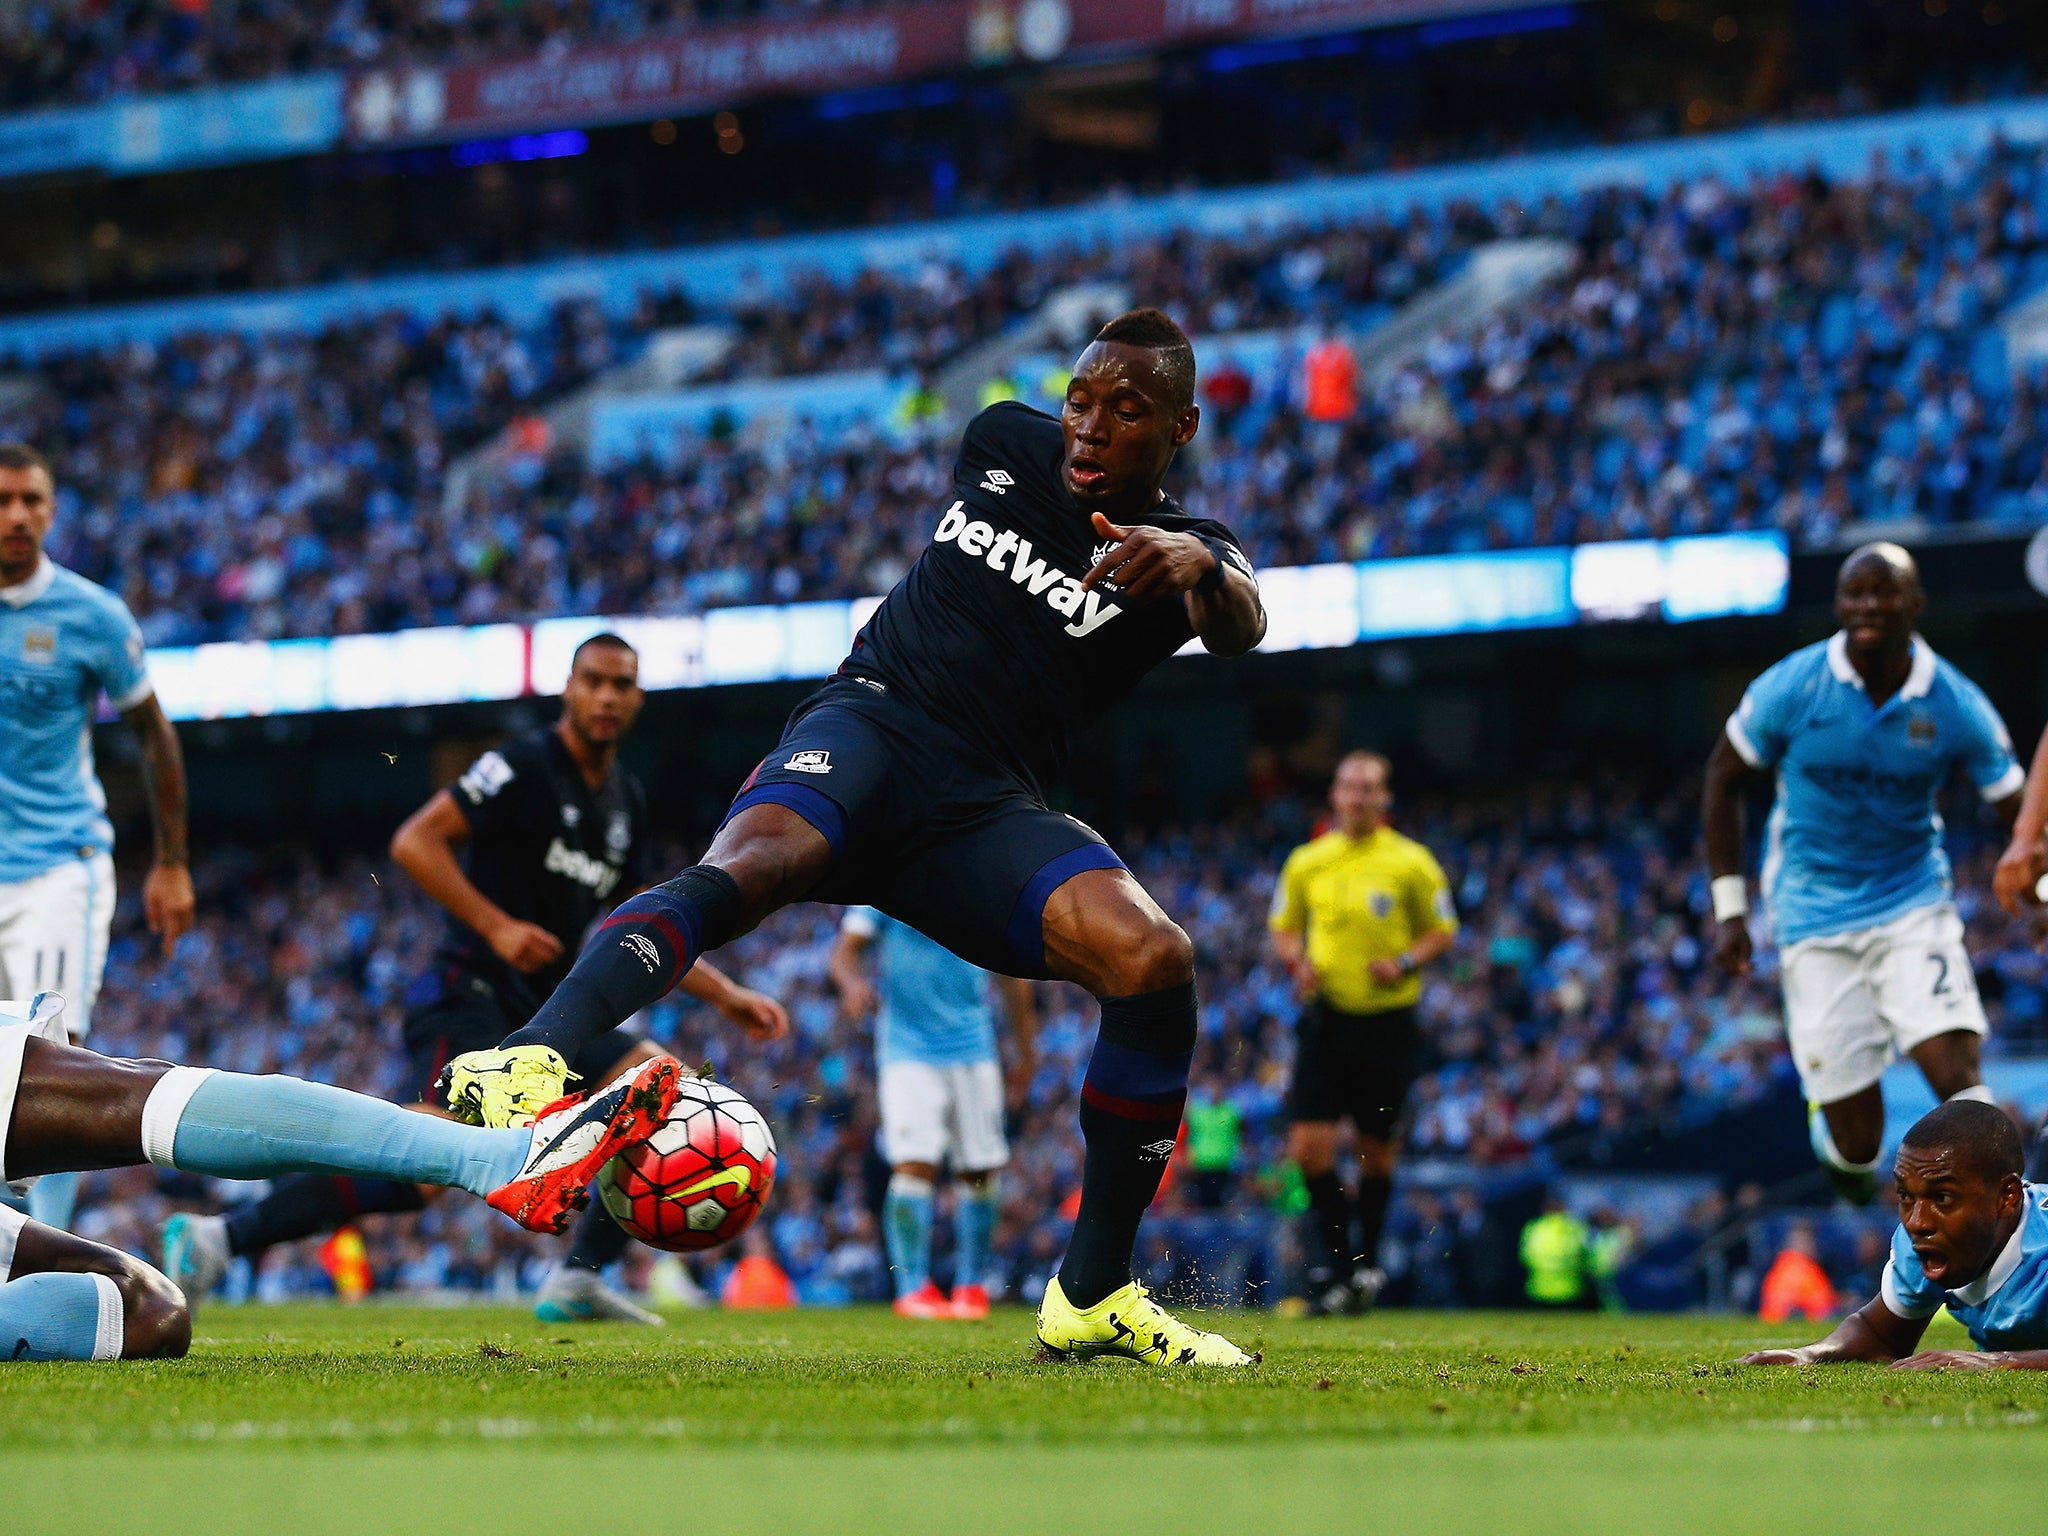 Diafra Sakho reacted quickest to score the second